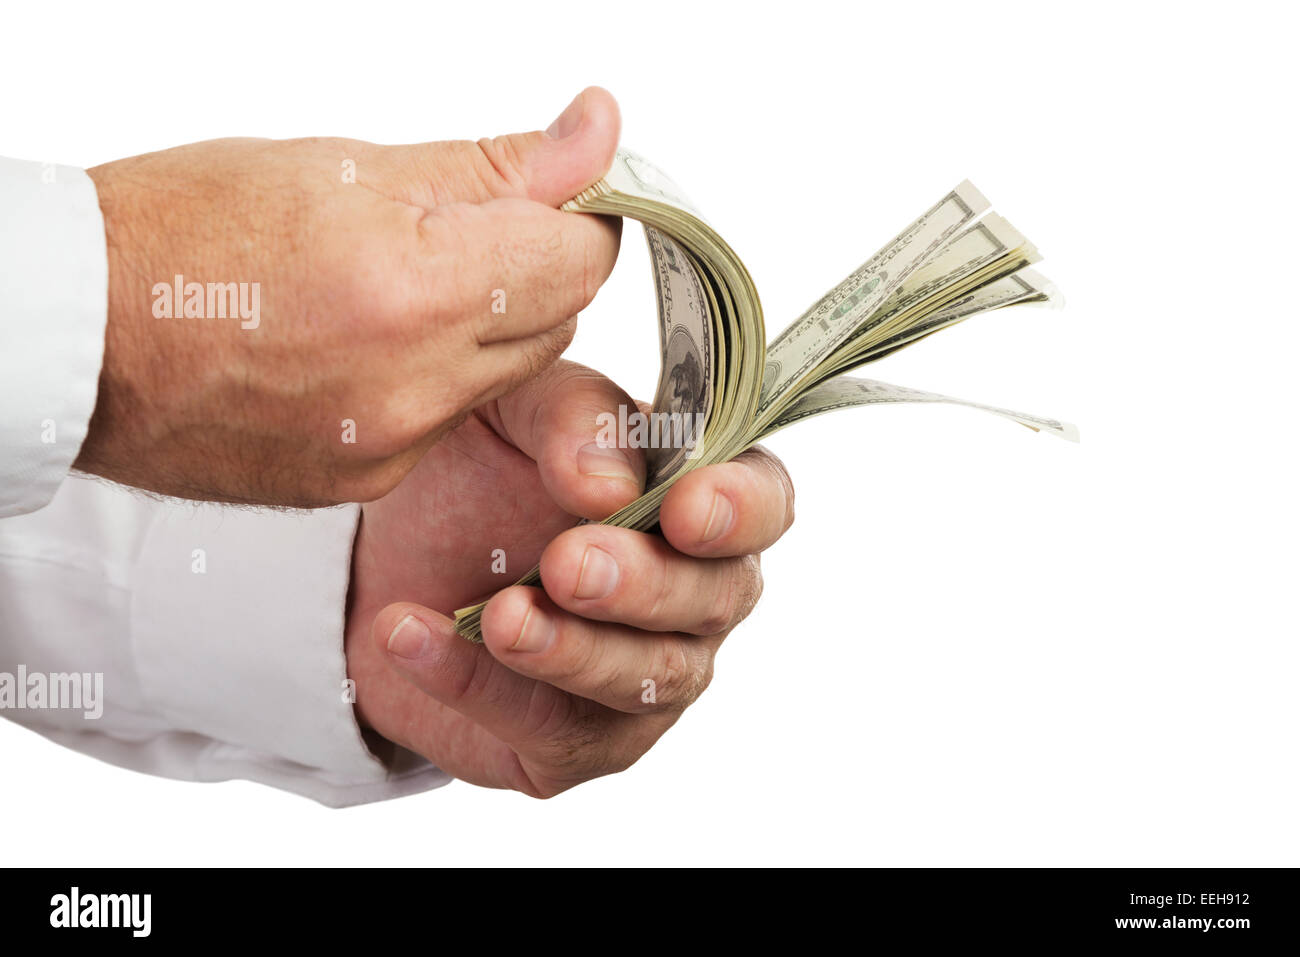 Hands of businessman holding and counting money isolated on white background.Selective focus. Stock Photo